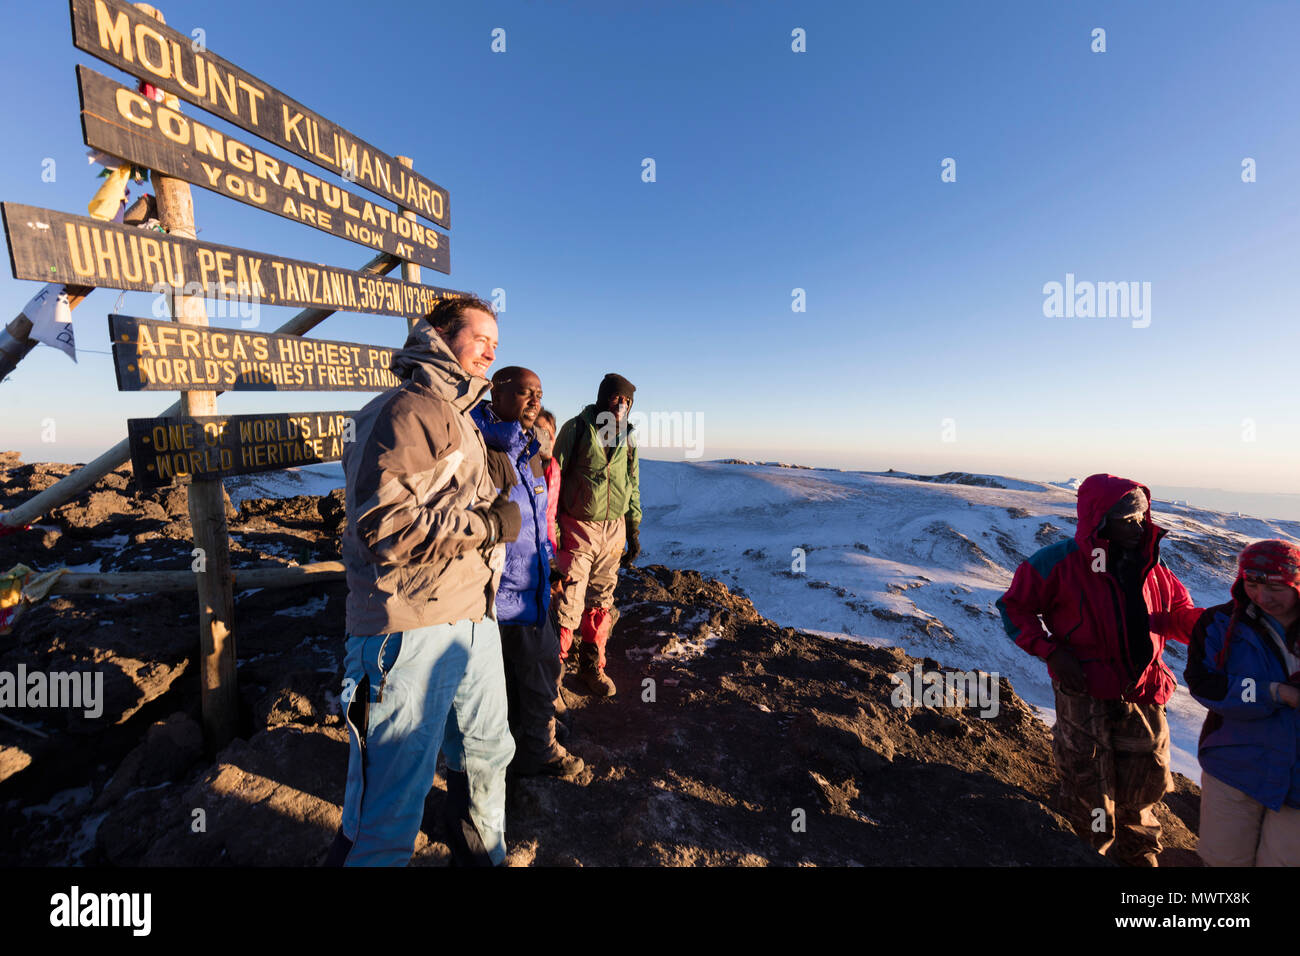 Climbers at summit sign and views on Mount Kilimanjaro, Kilimanjaro National Park, UNESCO World Heritage Site, Tanzania, East Africa, Africa Stock Photo